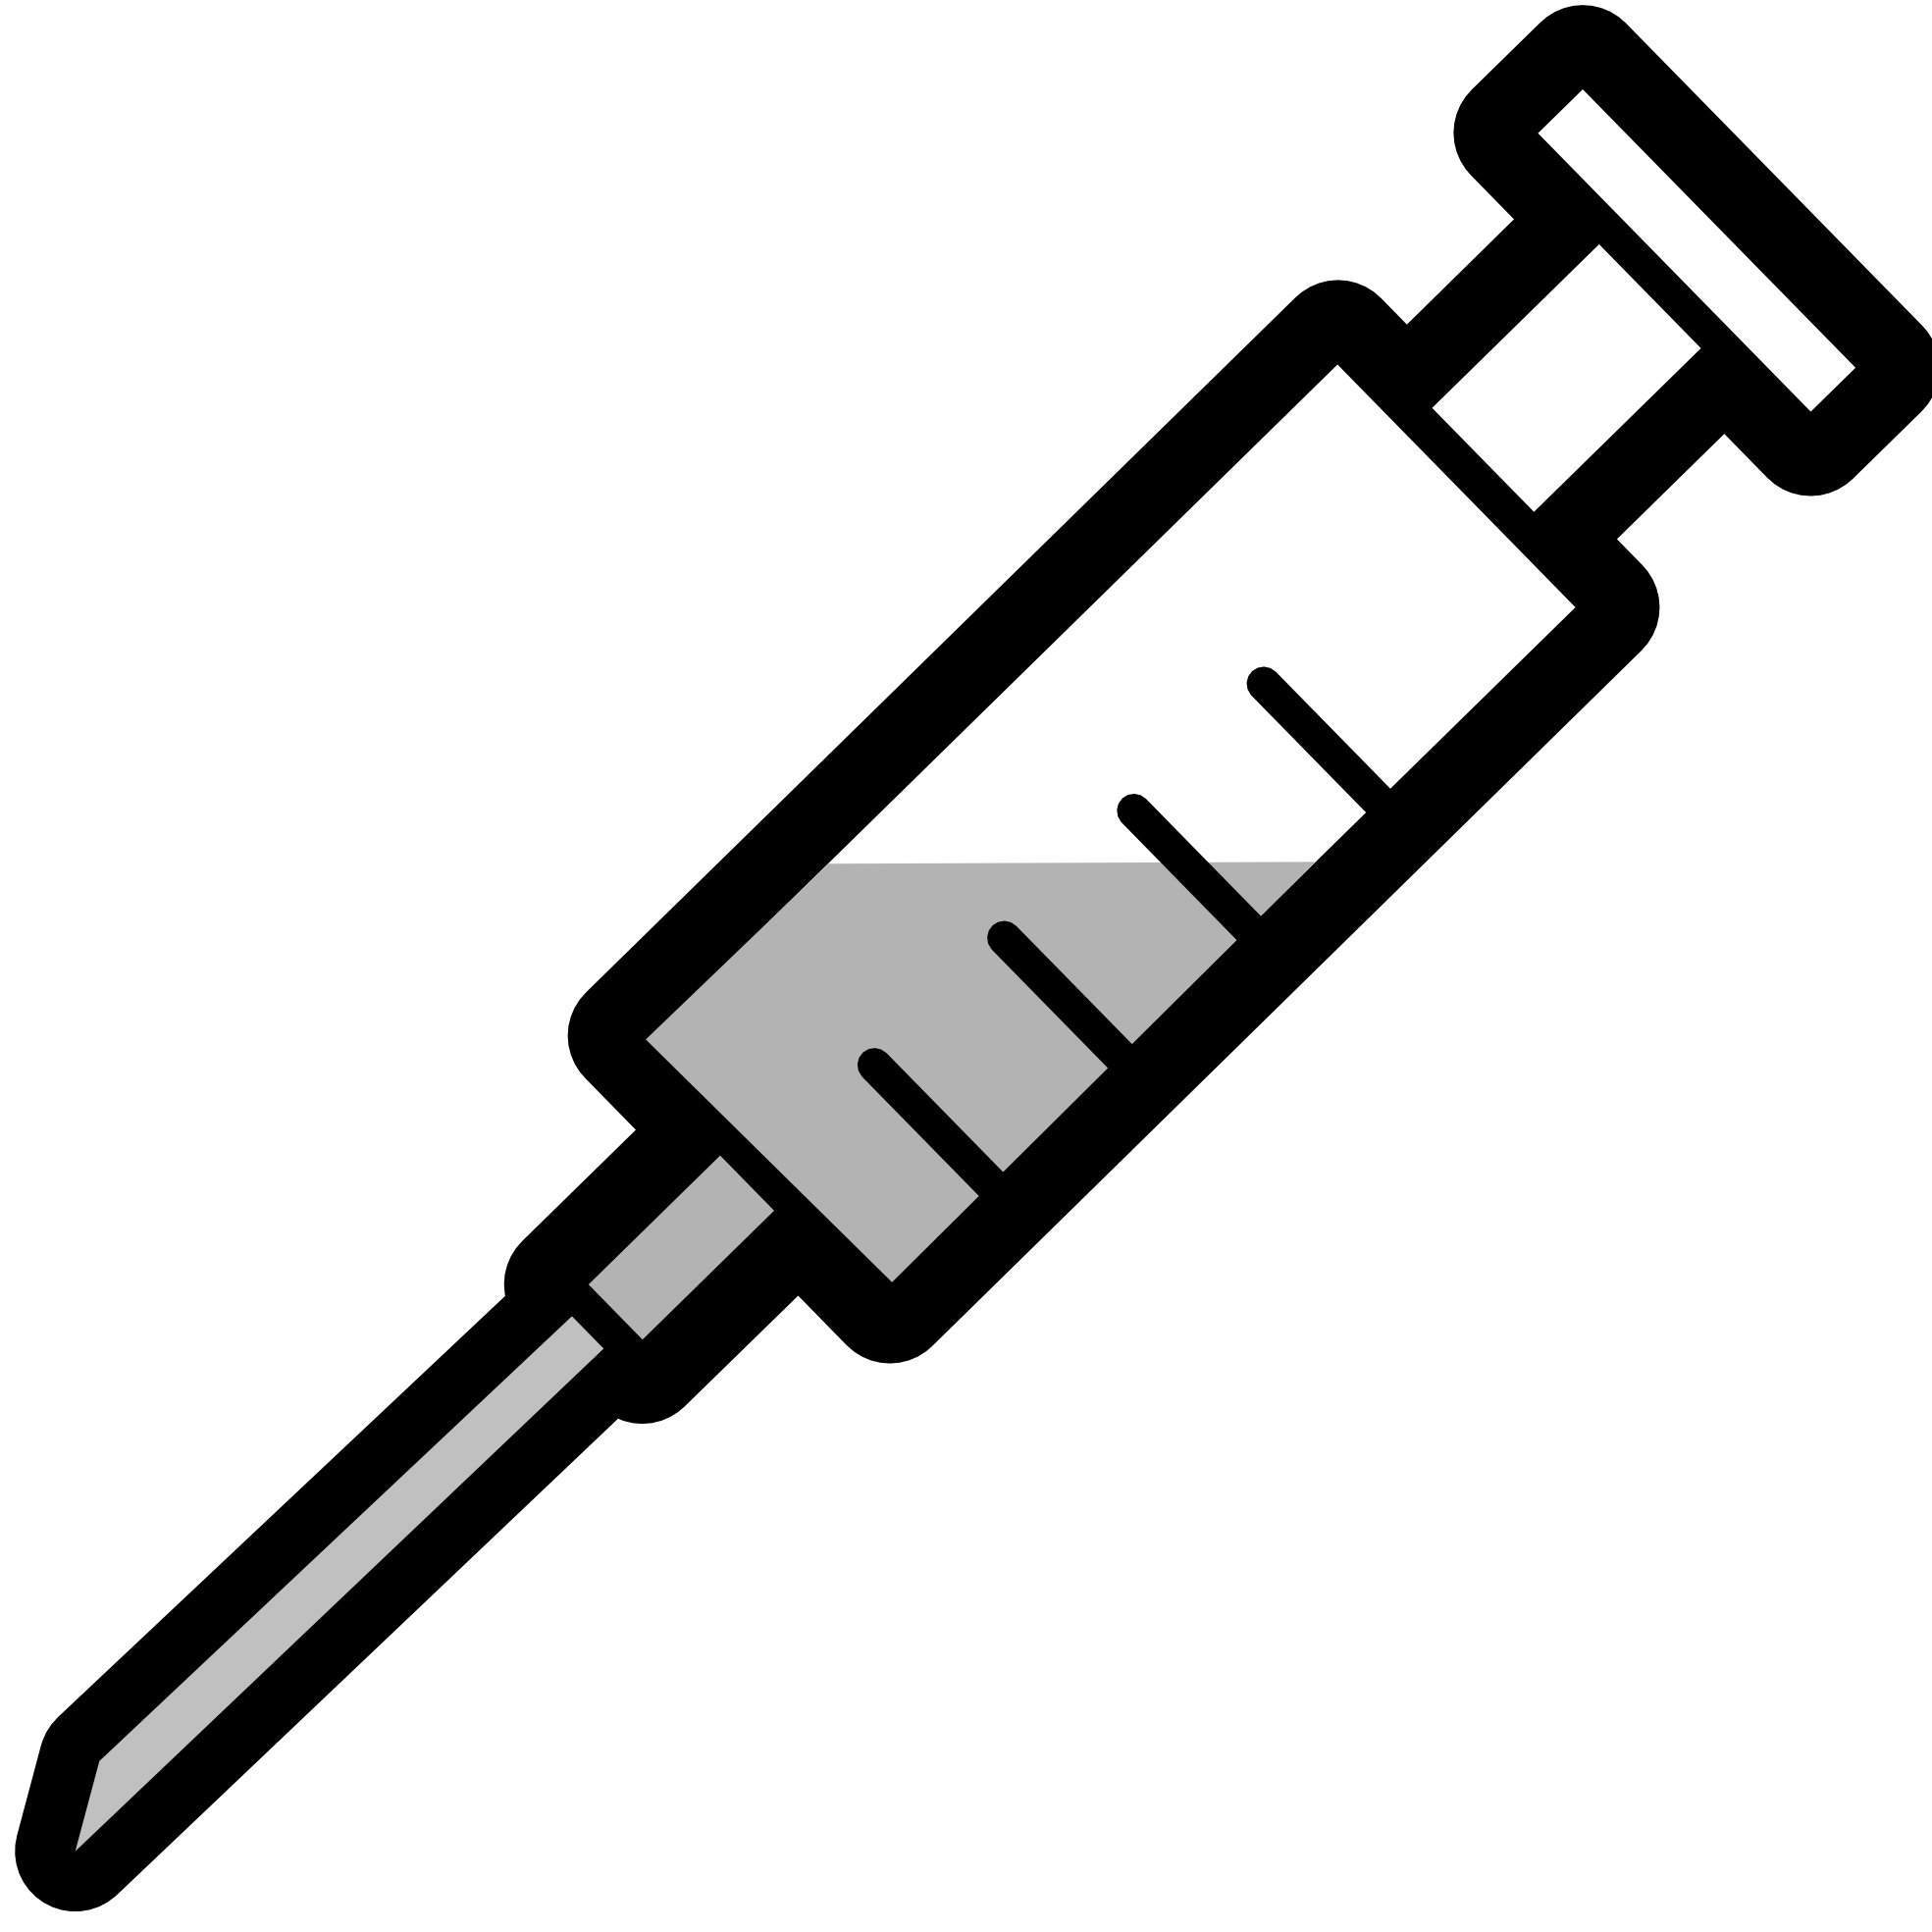 Syringe 20clipart   Clipart Panda   Free Clipart Images